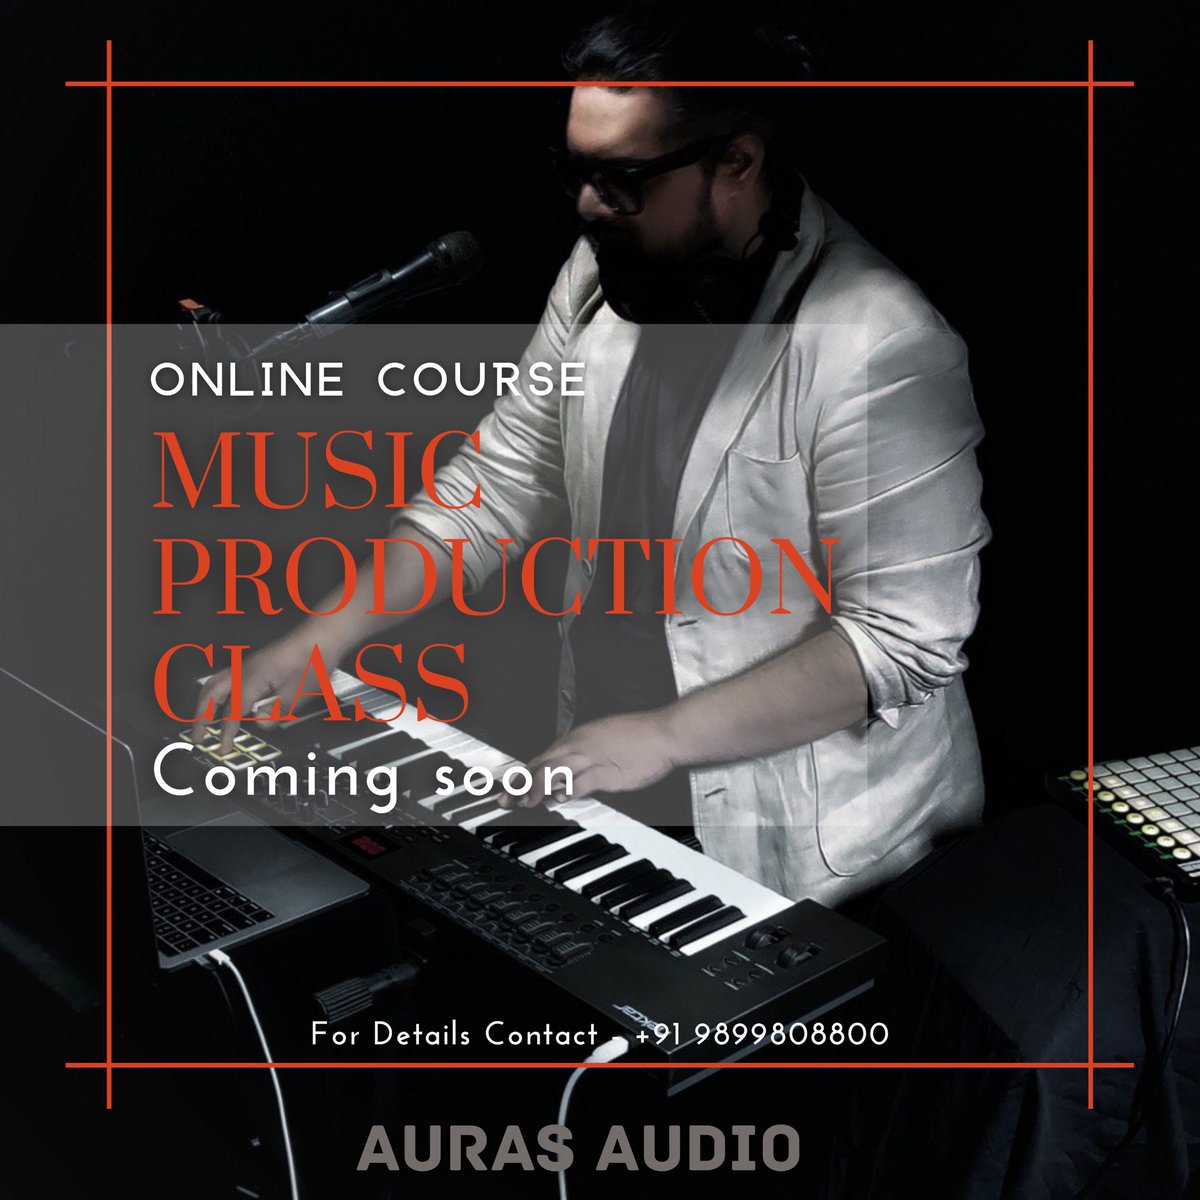 Learn Music Production 

' Online Course Coming Soon ' 

Contact for details- +91 9899808800  

#insyncwithsound
#aurasaudio 

#musicproductioncourse 
#learnmusicproduction
#onlinemusiccourse  
#delhimusicians 
#bestrecordingstudiodelhi
#aurasaudiostudio